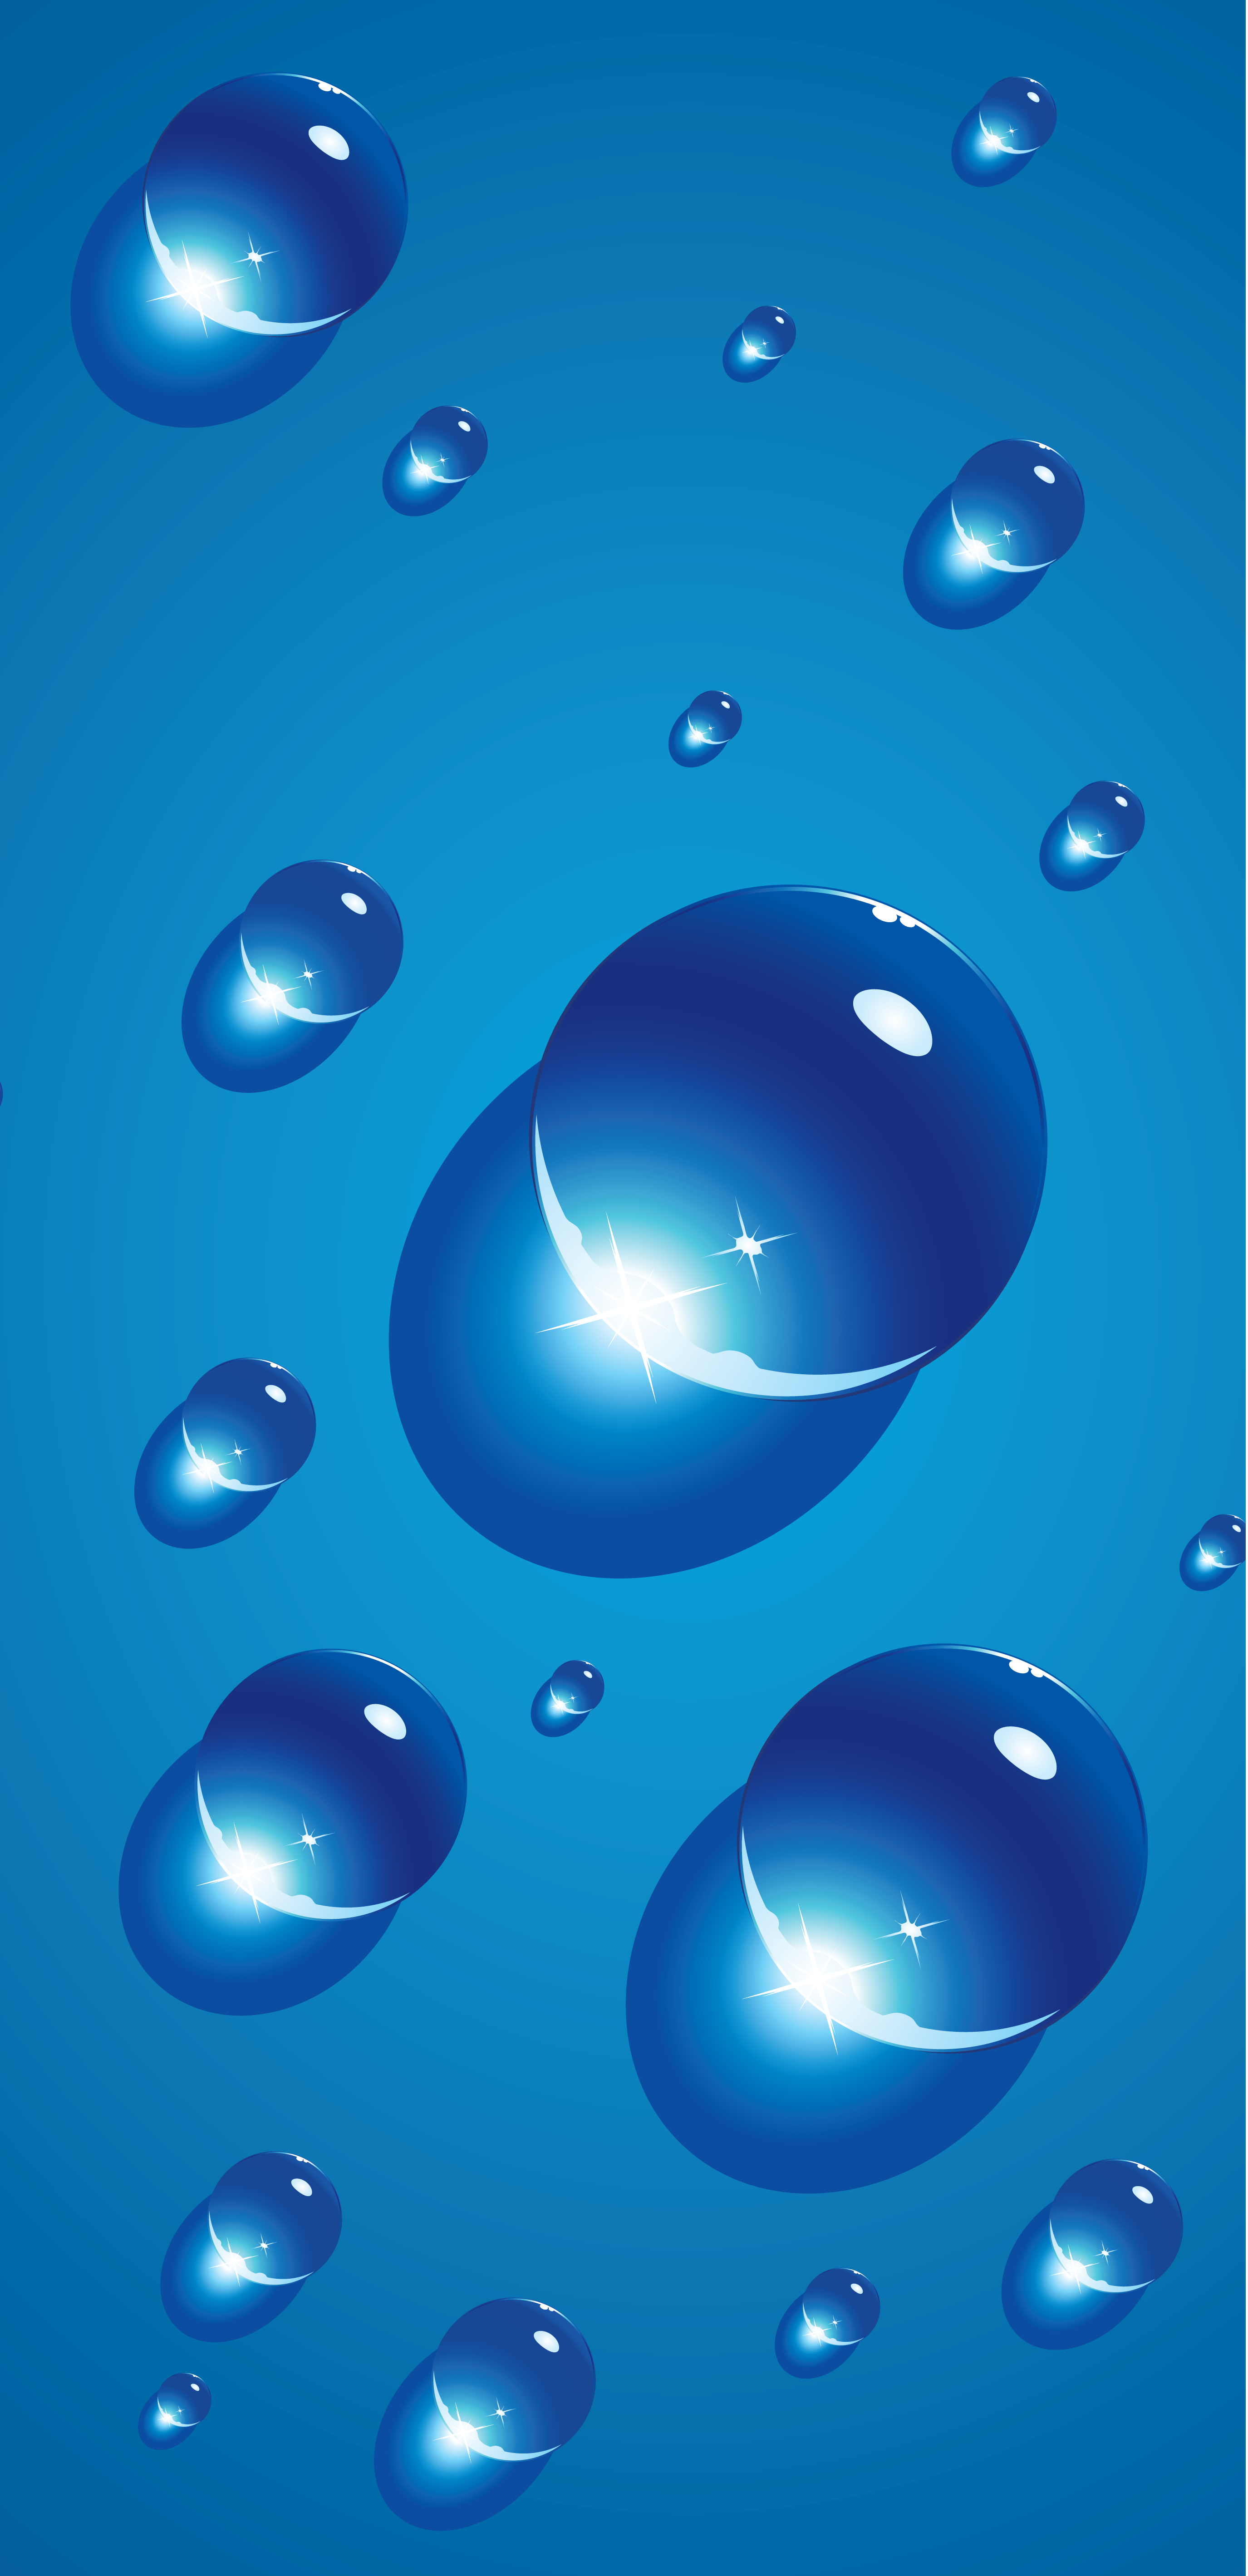 Colorful Water Droplet Wallpaper For iPhone